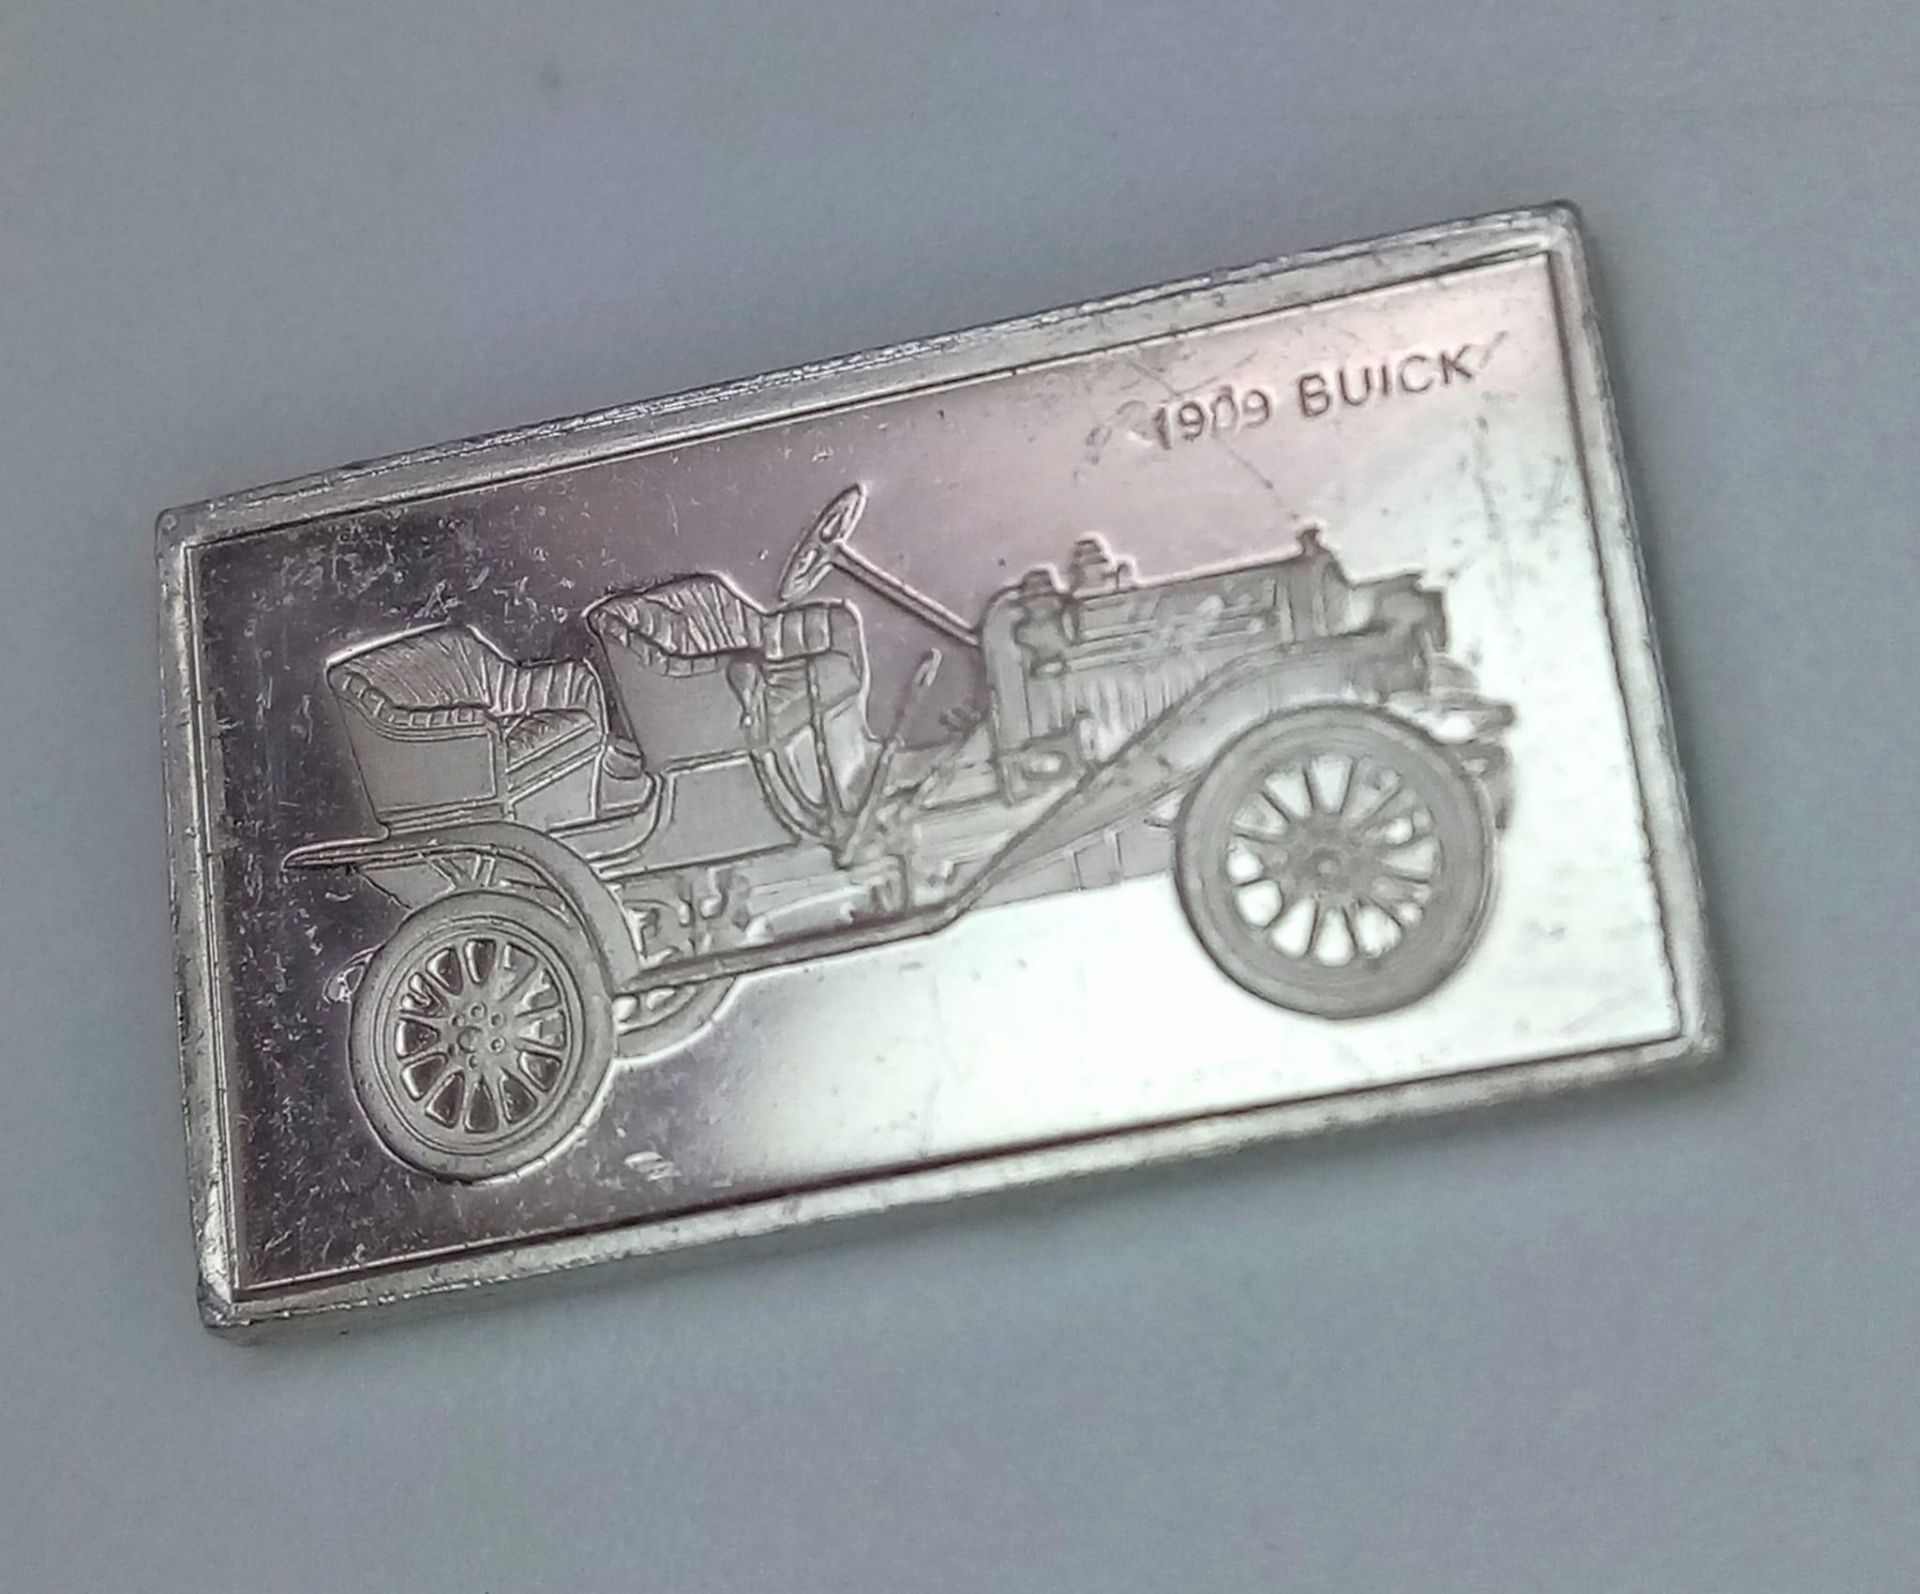 2 X STERLING SILVER AND ENAMEL BUICK CAR LOGO MANUFACTURER PLAQUES, MADE IN UNITED STATES USA, - Image 4 of 11